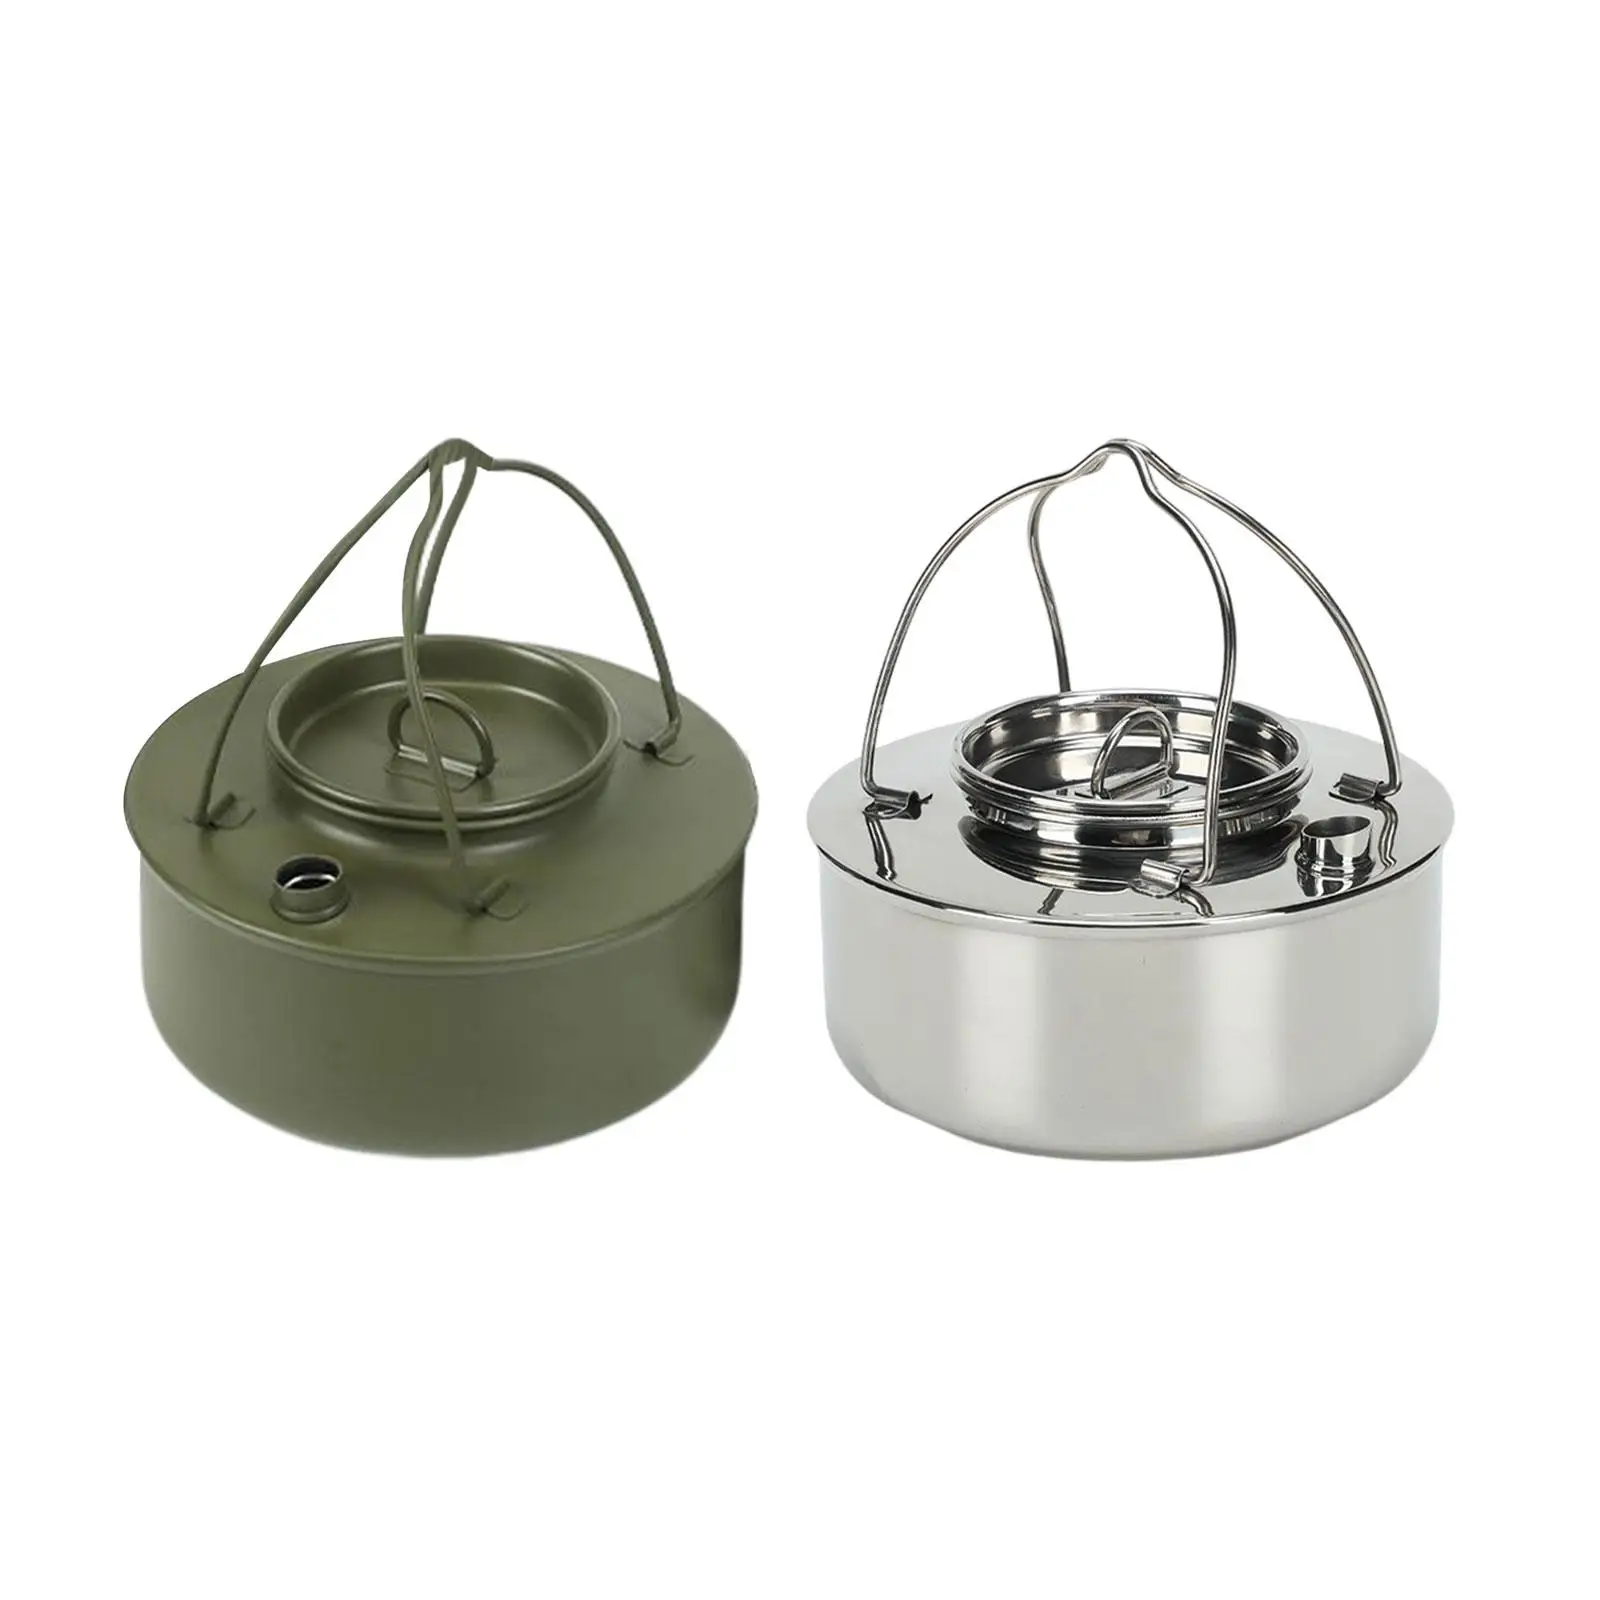 

Portable Camping Kettle Teapot Camping Cookware Water Boiler Outdoor Kettle for Picnic Travel Backpacking Camping Hiking